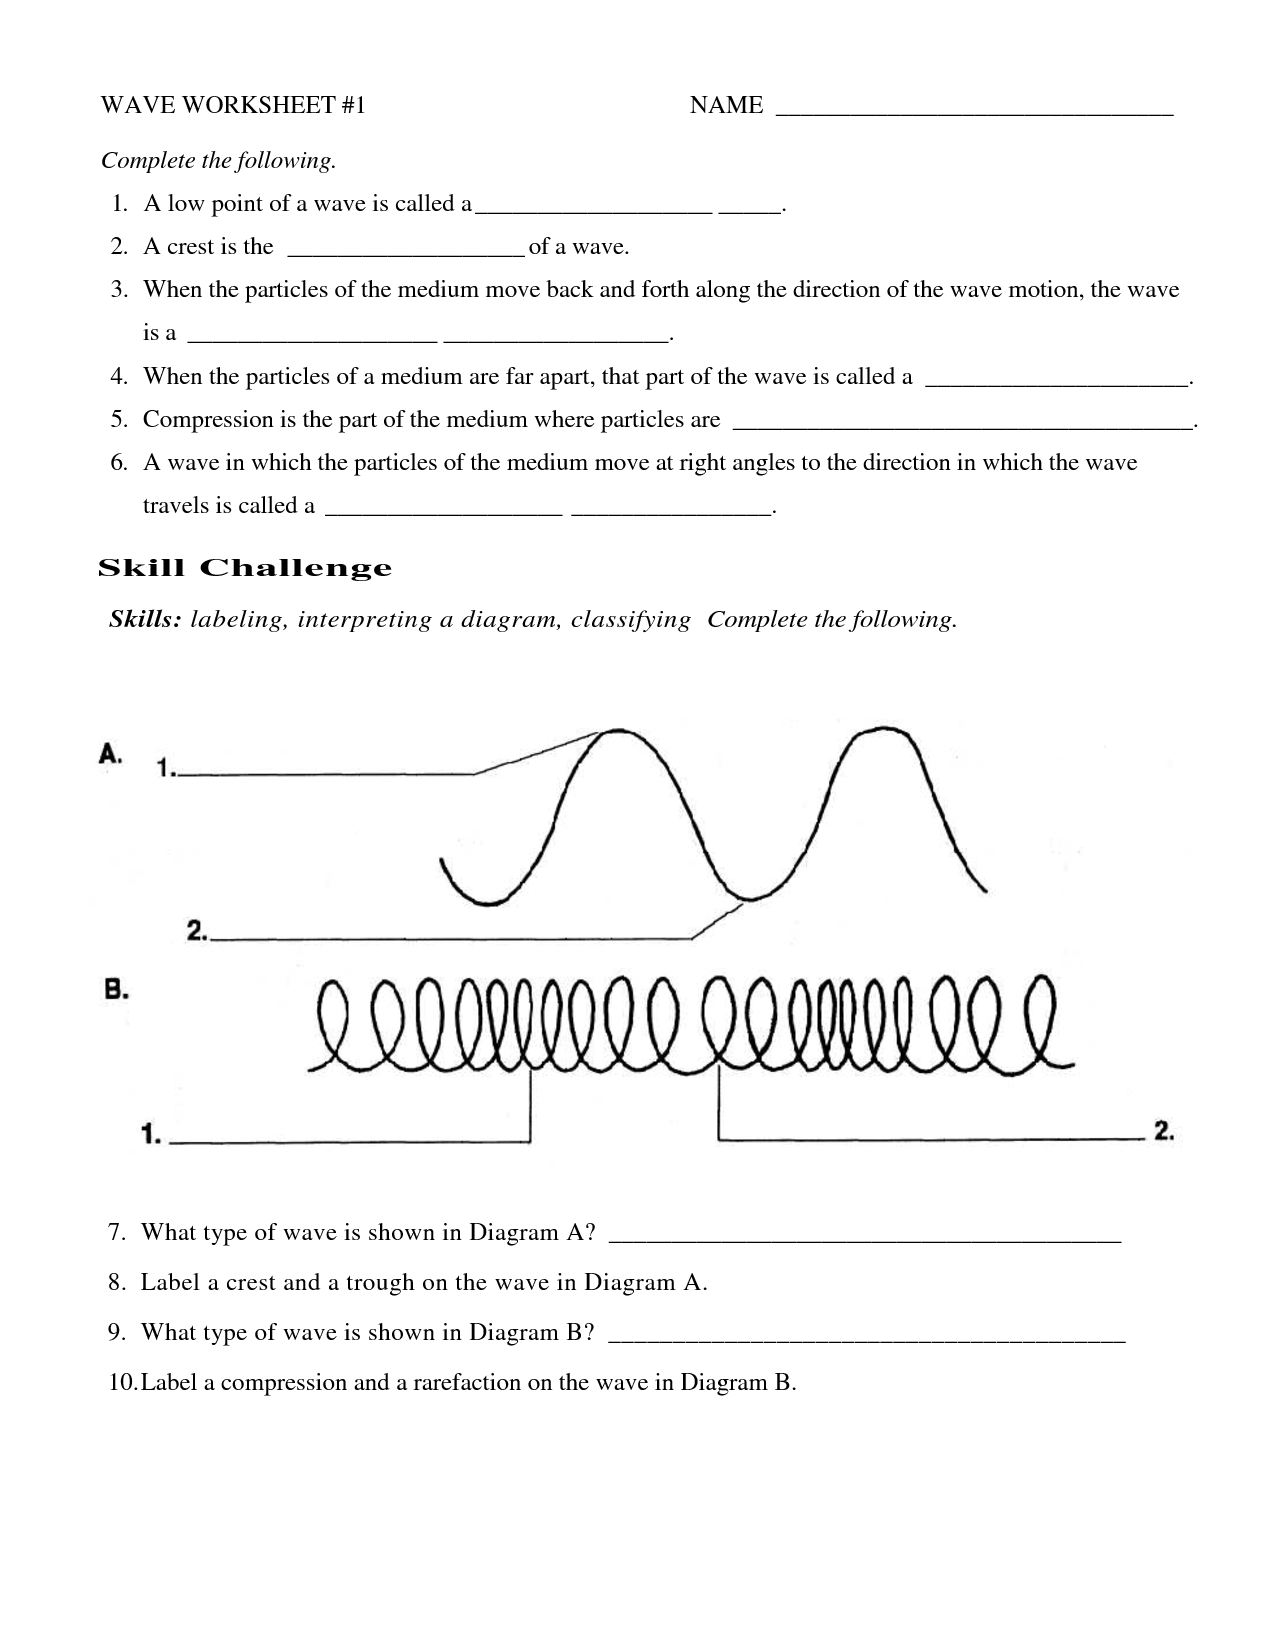 wave-speed-equation-practice-problems-key-answers-anatomy-of-a-wave-worksheet-answers-the